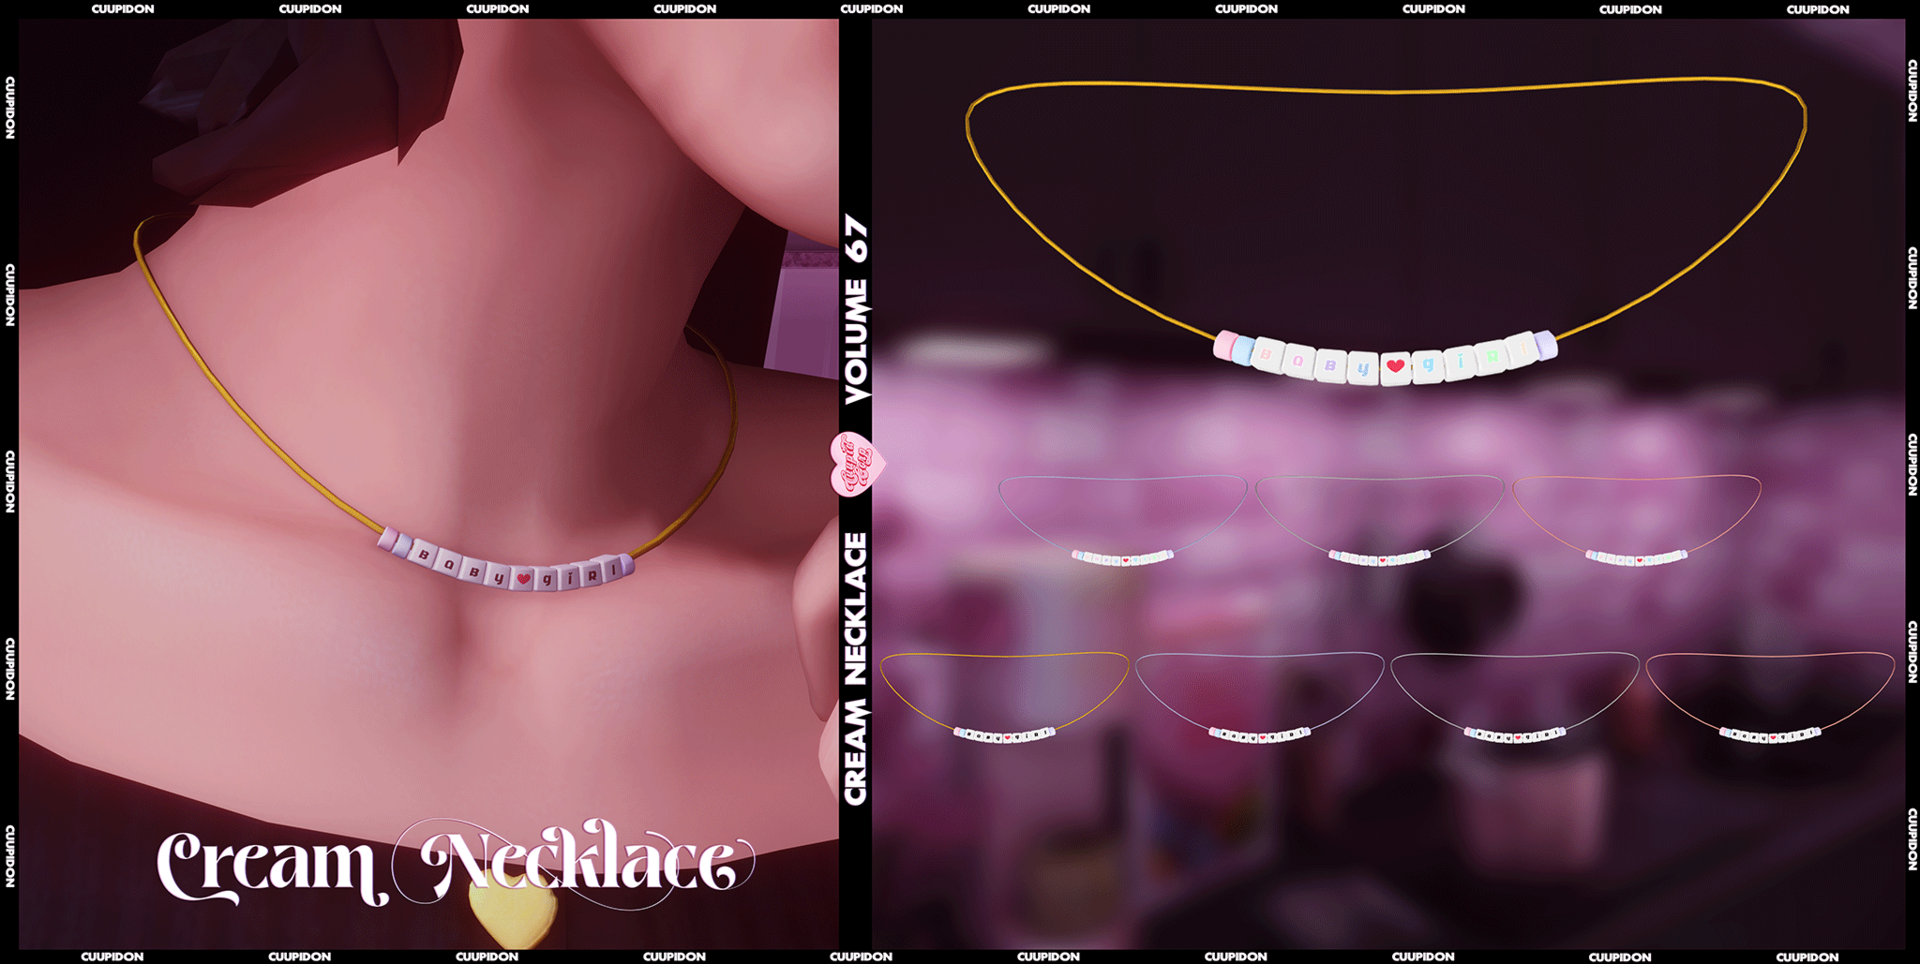 Cream-Necklace-Preview-smaller.thumb.png.371ab3b6abeea8f96f8bd3f622d66fe3.png